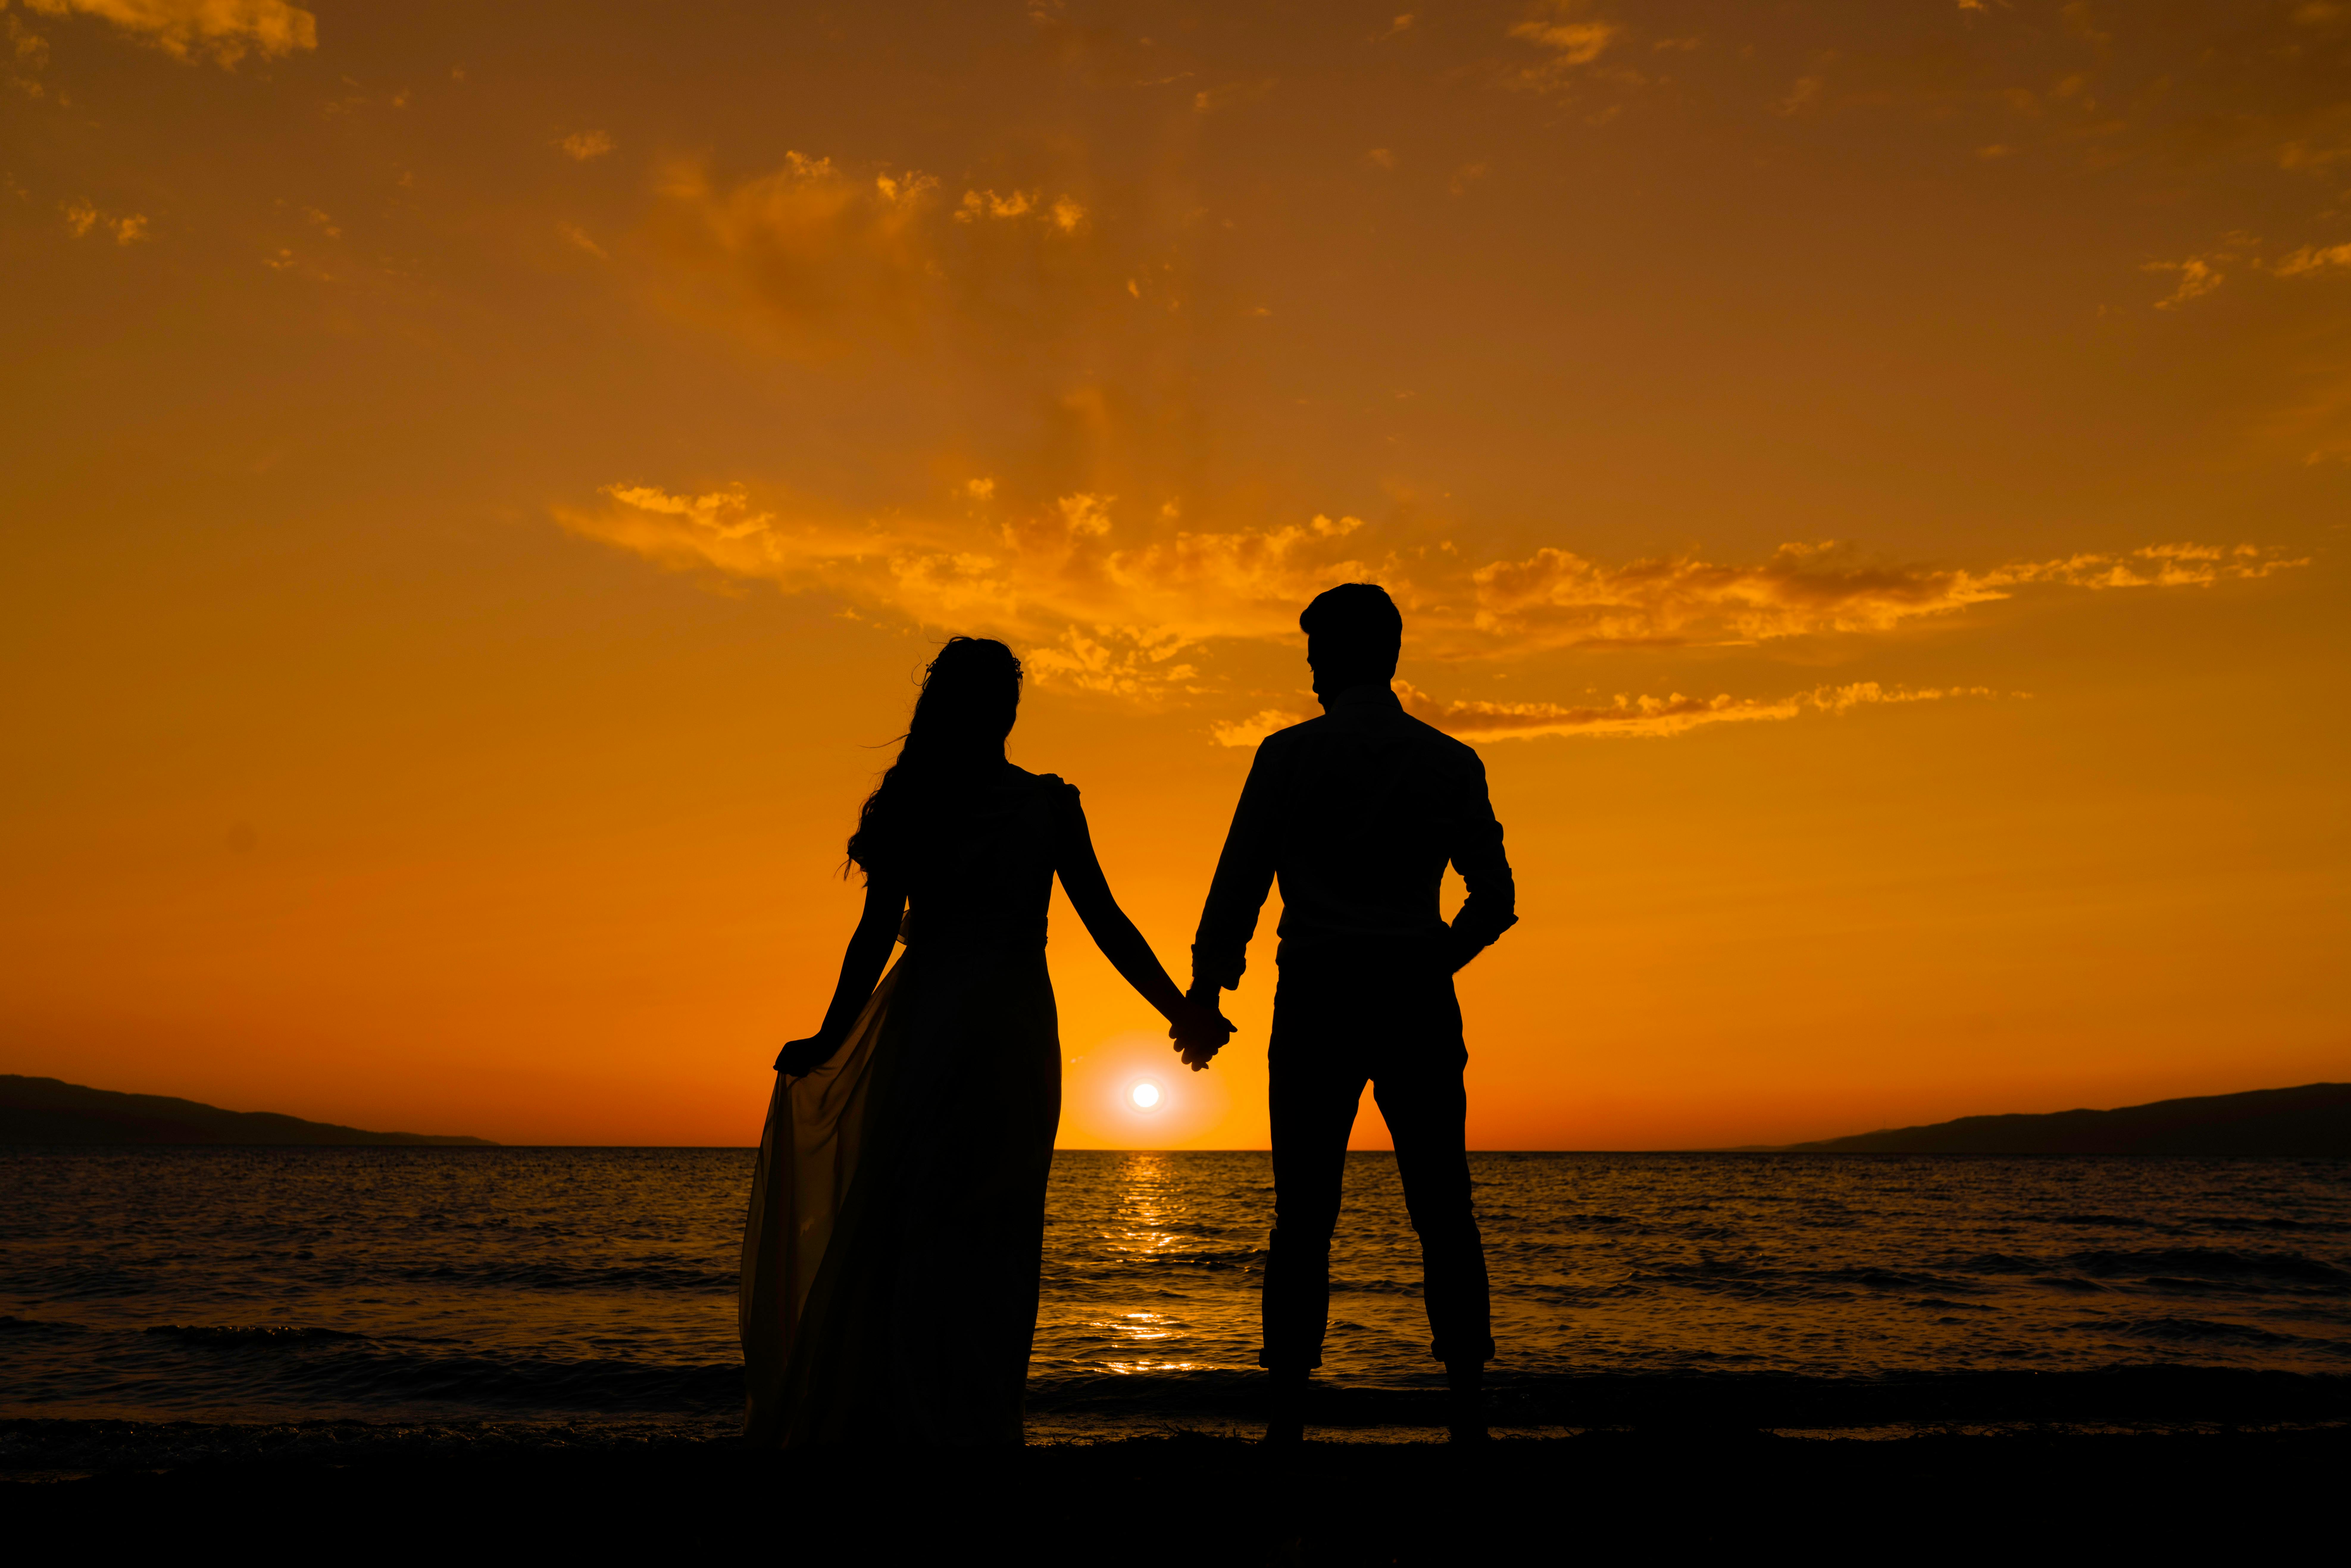 couple holding hands silhouette